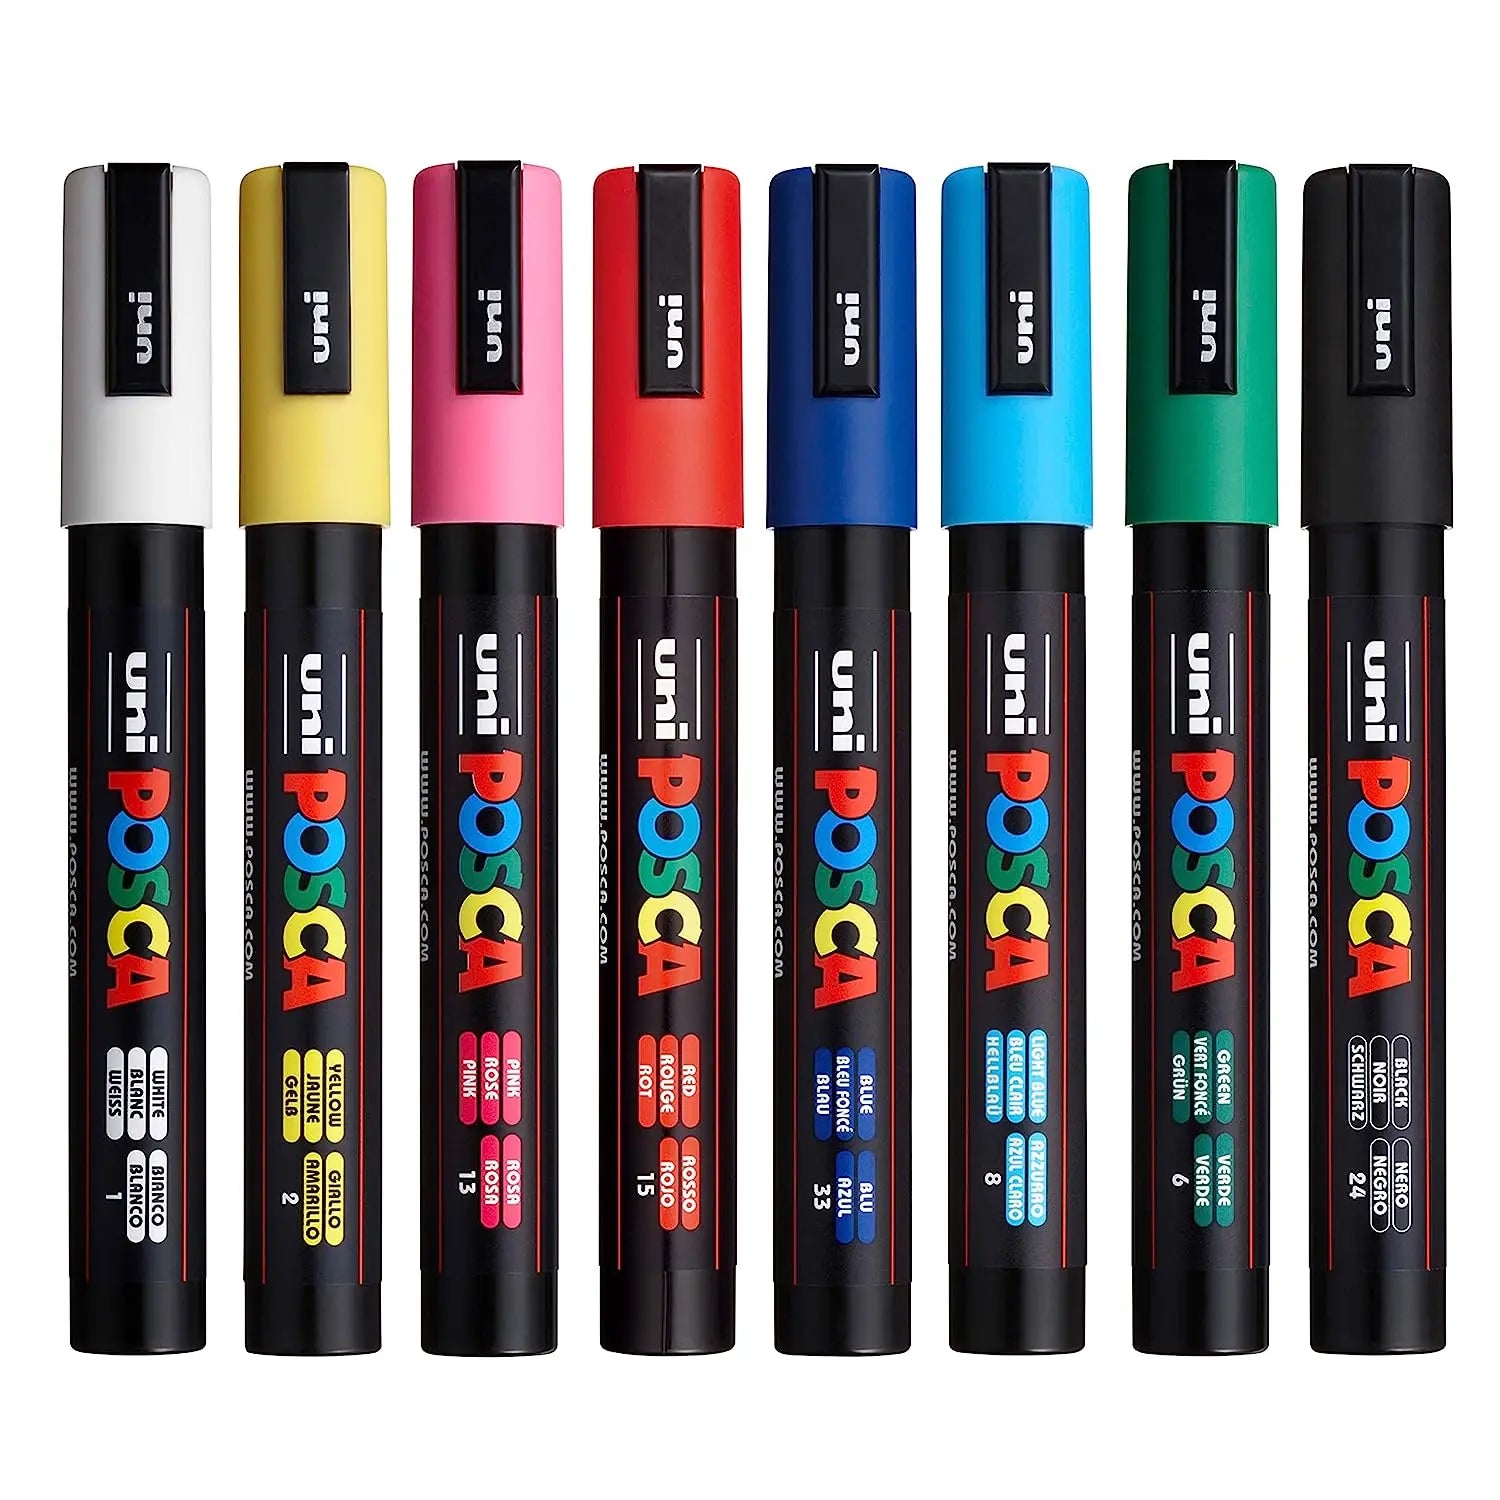 Uniball Posca 5M Markers with Medium Point Pen Tips for Fabric, Glass Paint, Metal Paint Posca